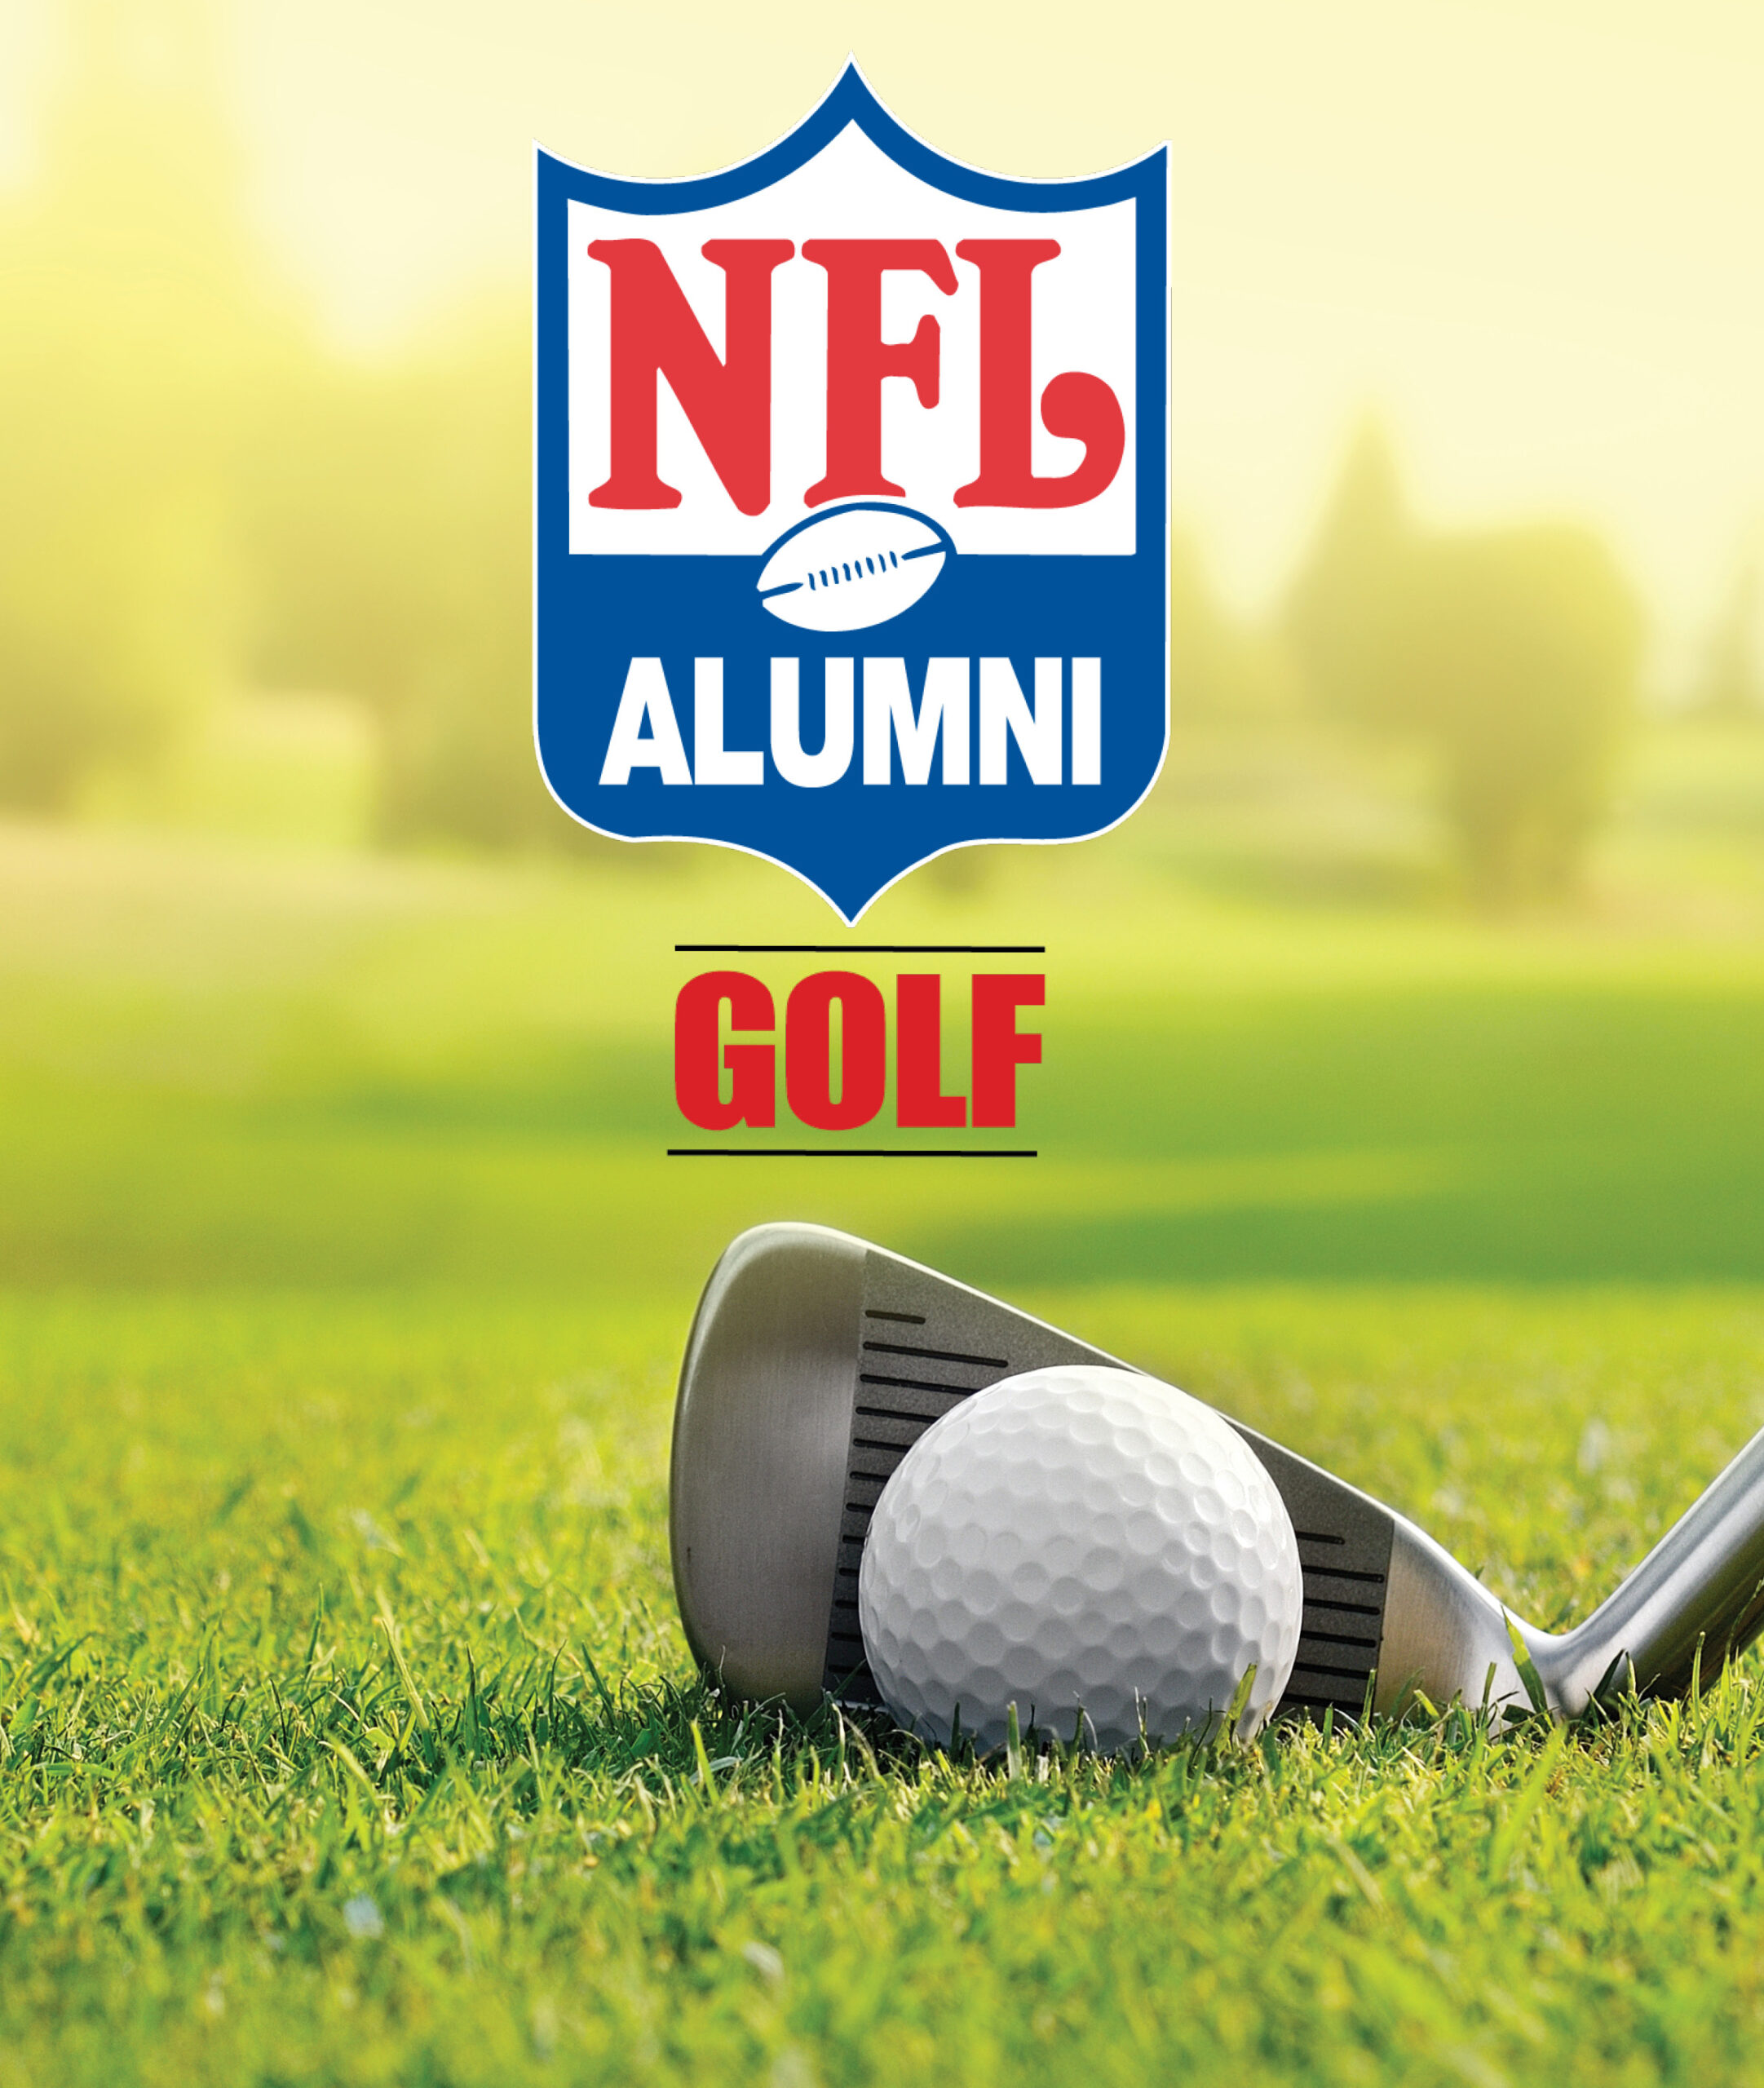 GOLF Sign up for NFLA Alumni Membership Today